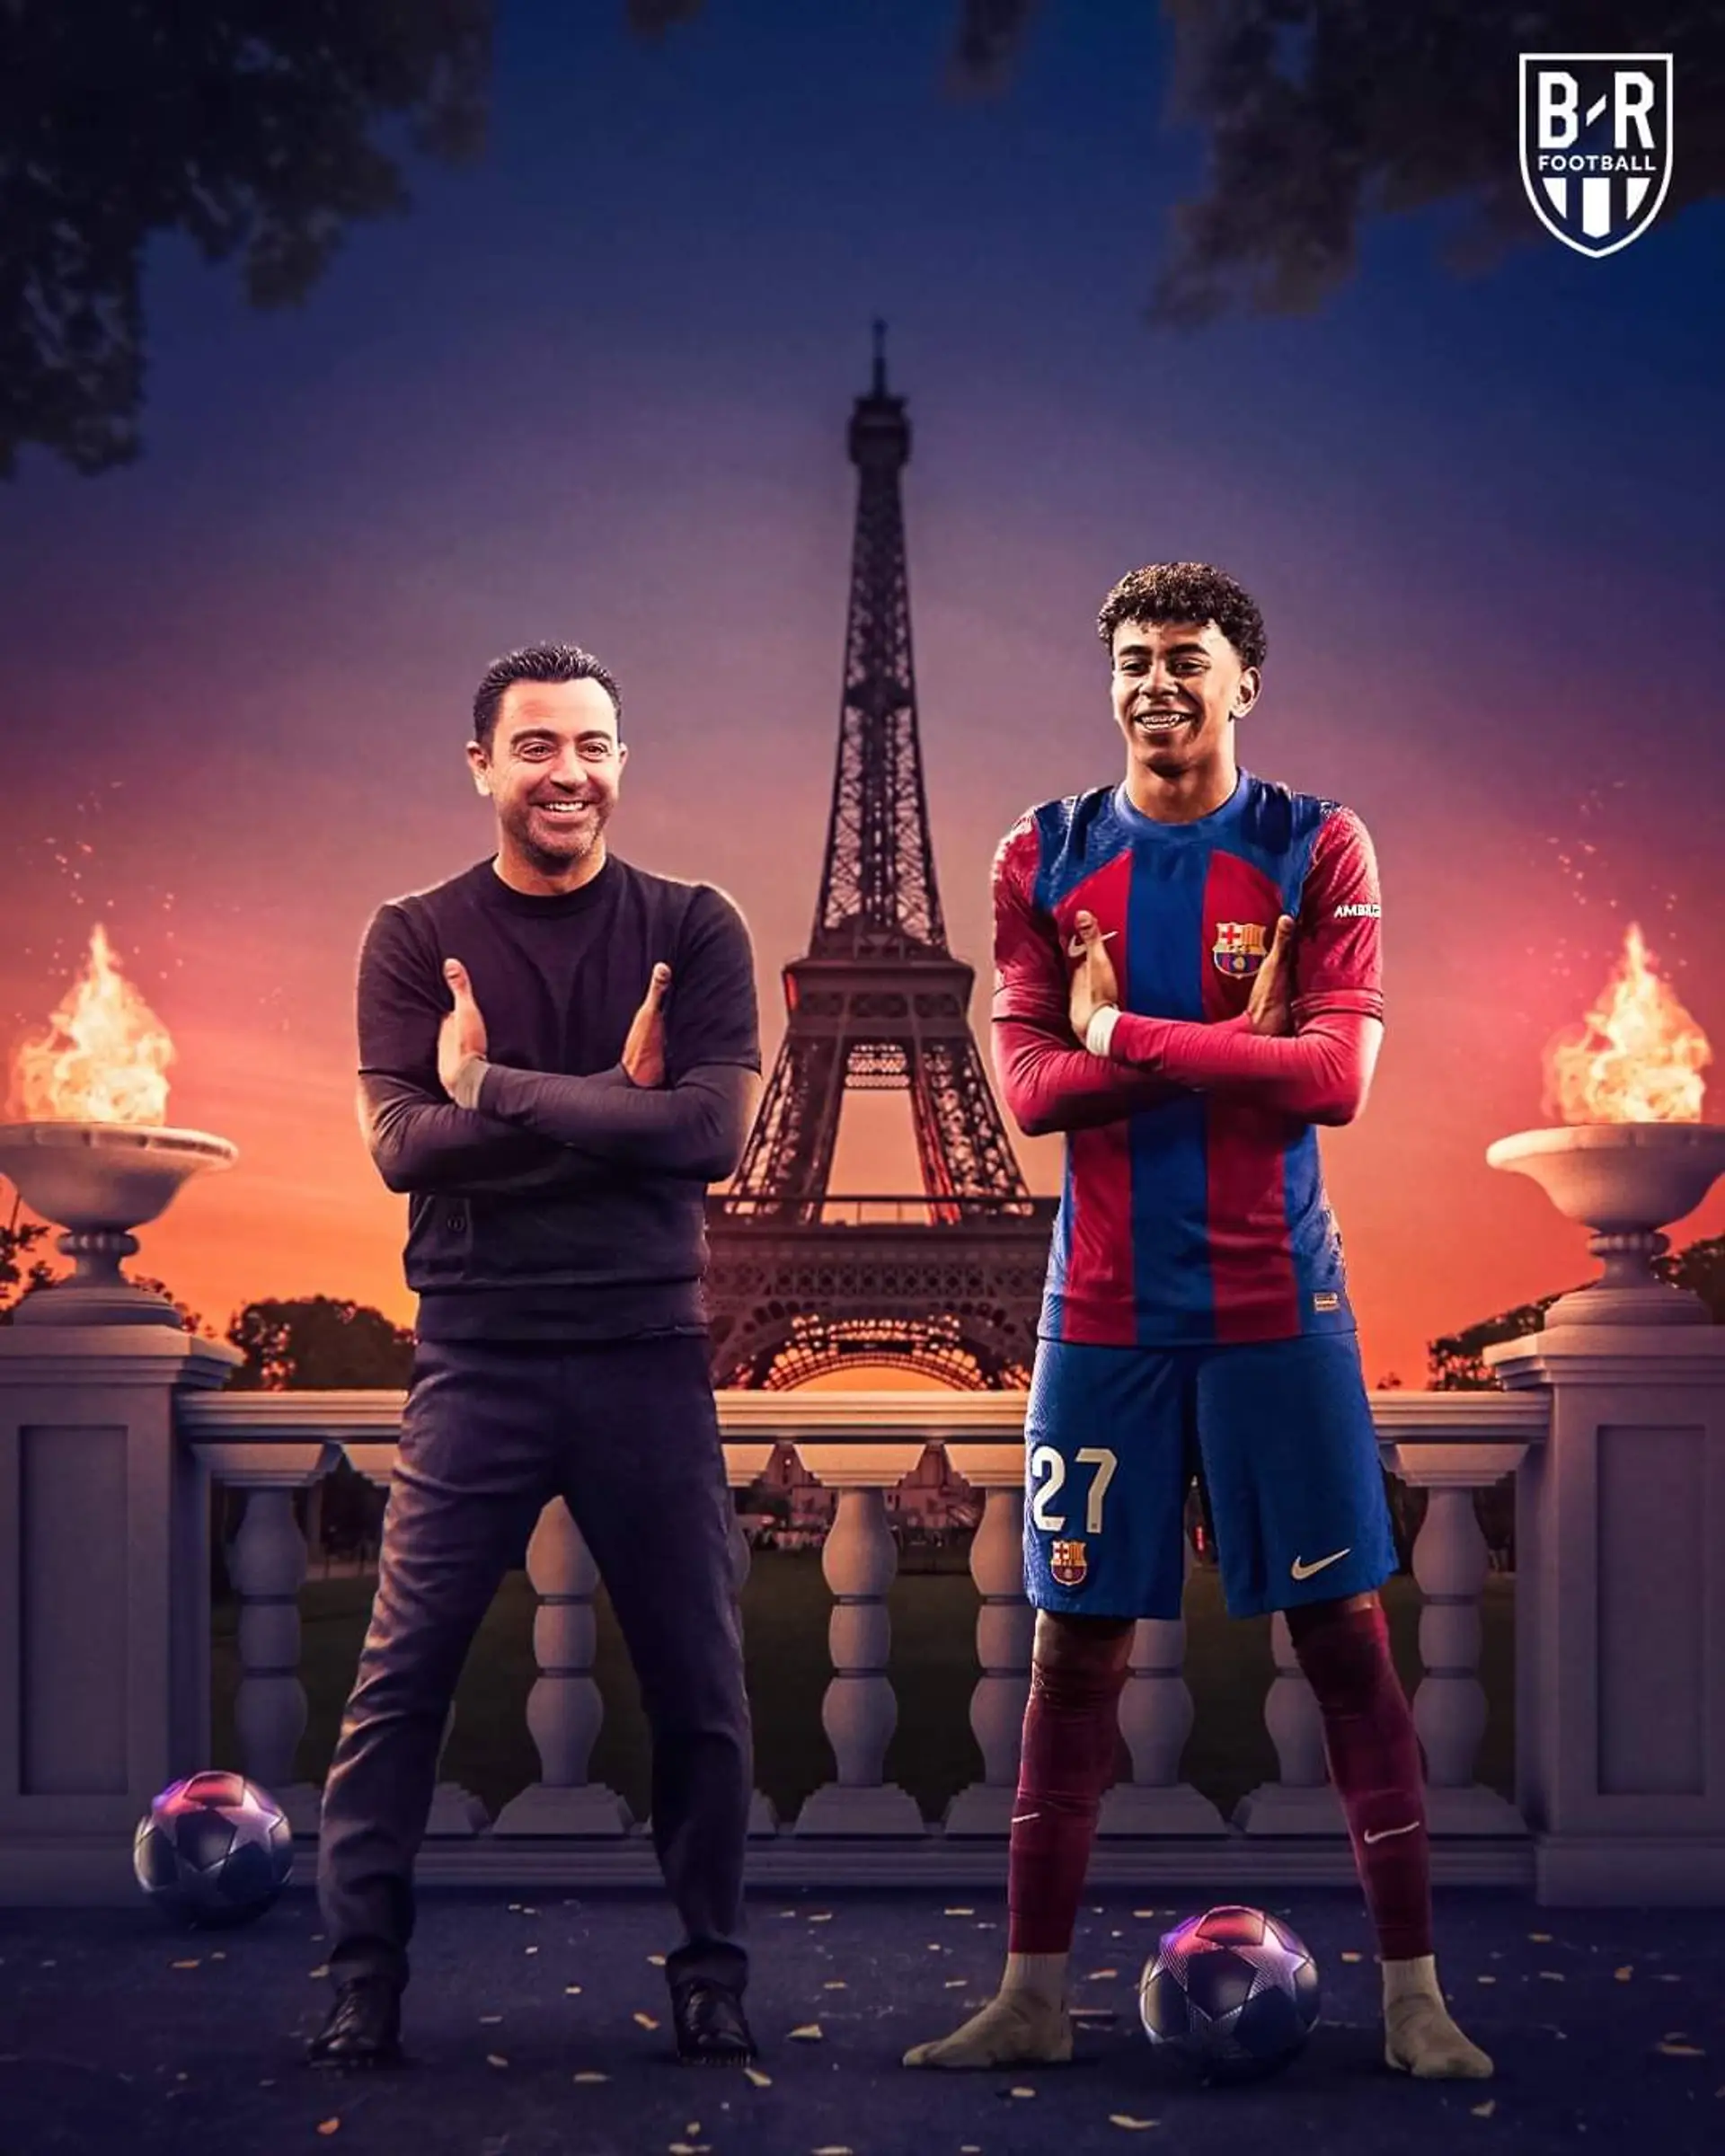 Barcelona go into Kylian Mbappé's house and beat PSG 3-2 to win a 𝐰𝐢𝐥𝐝 one in Paris 😏